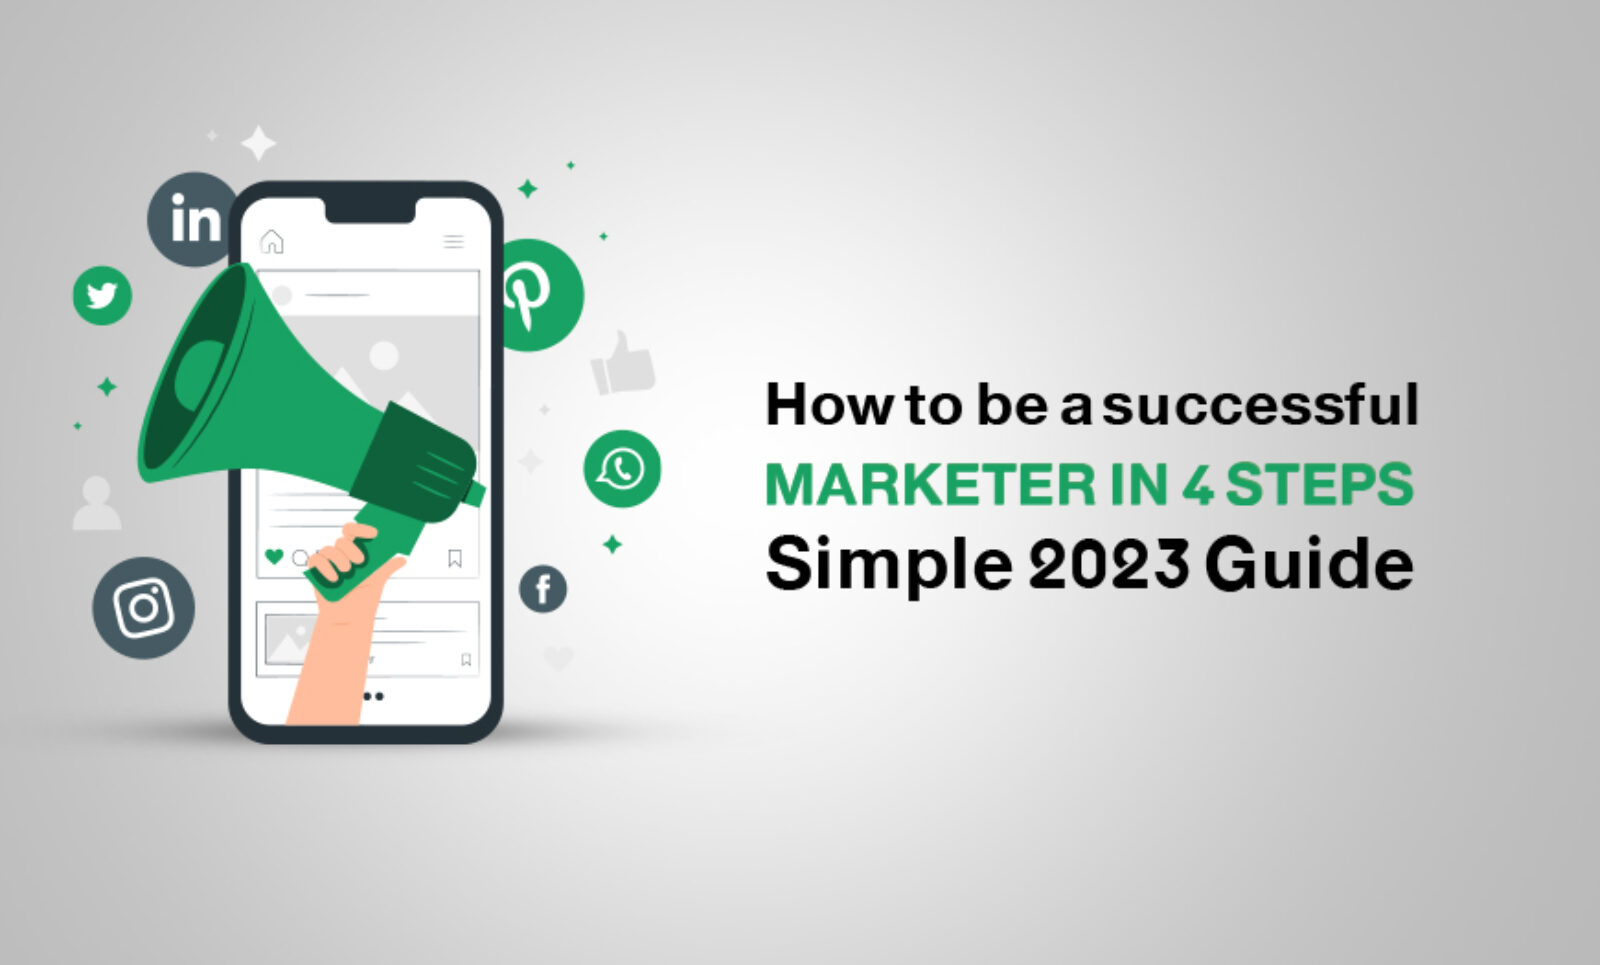 How to be a successful marketer in 4 steps – Simple 2023 Guide